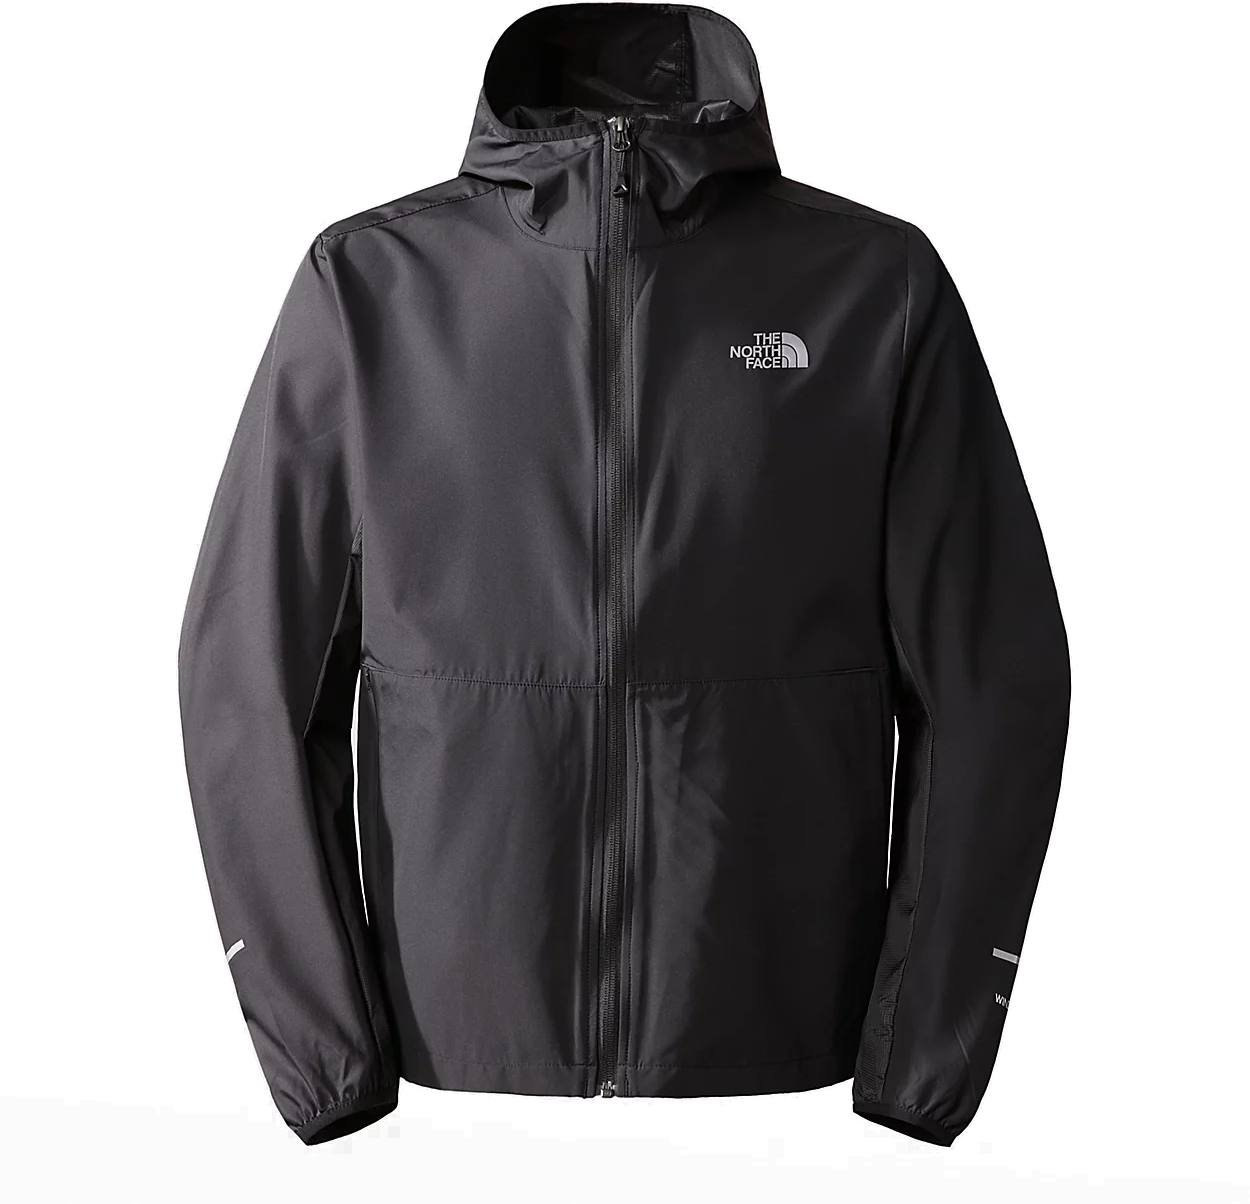 The North Face Running Wind Jacket Black M